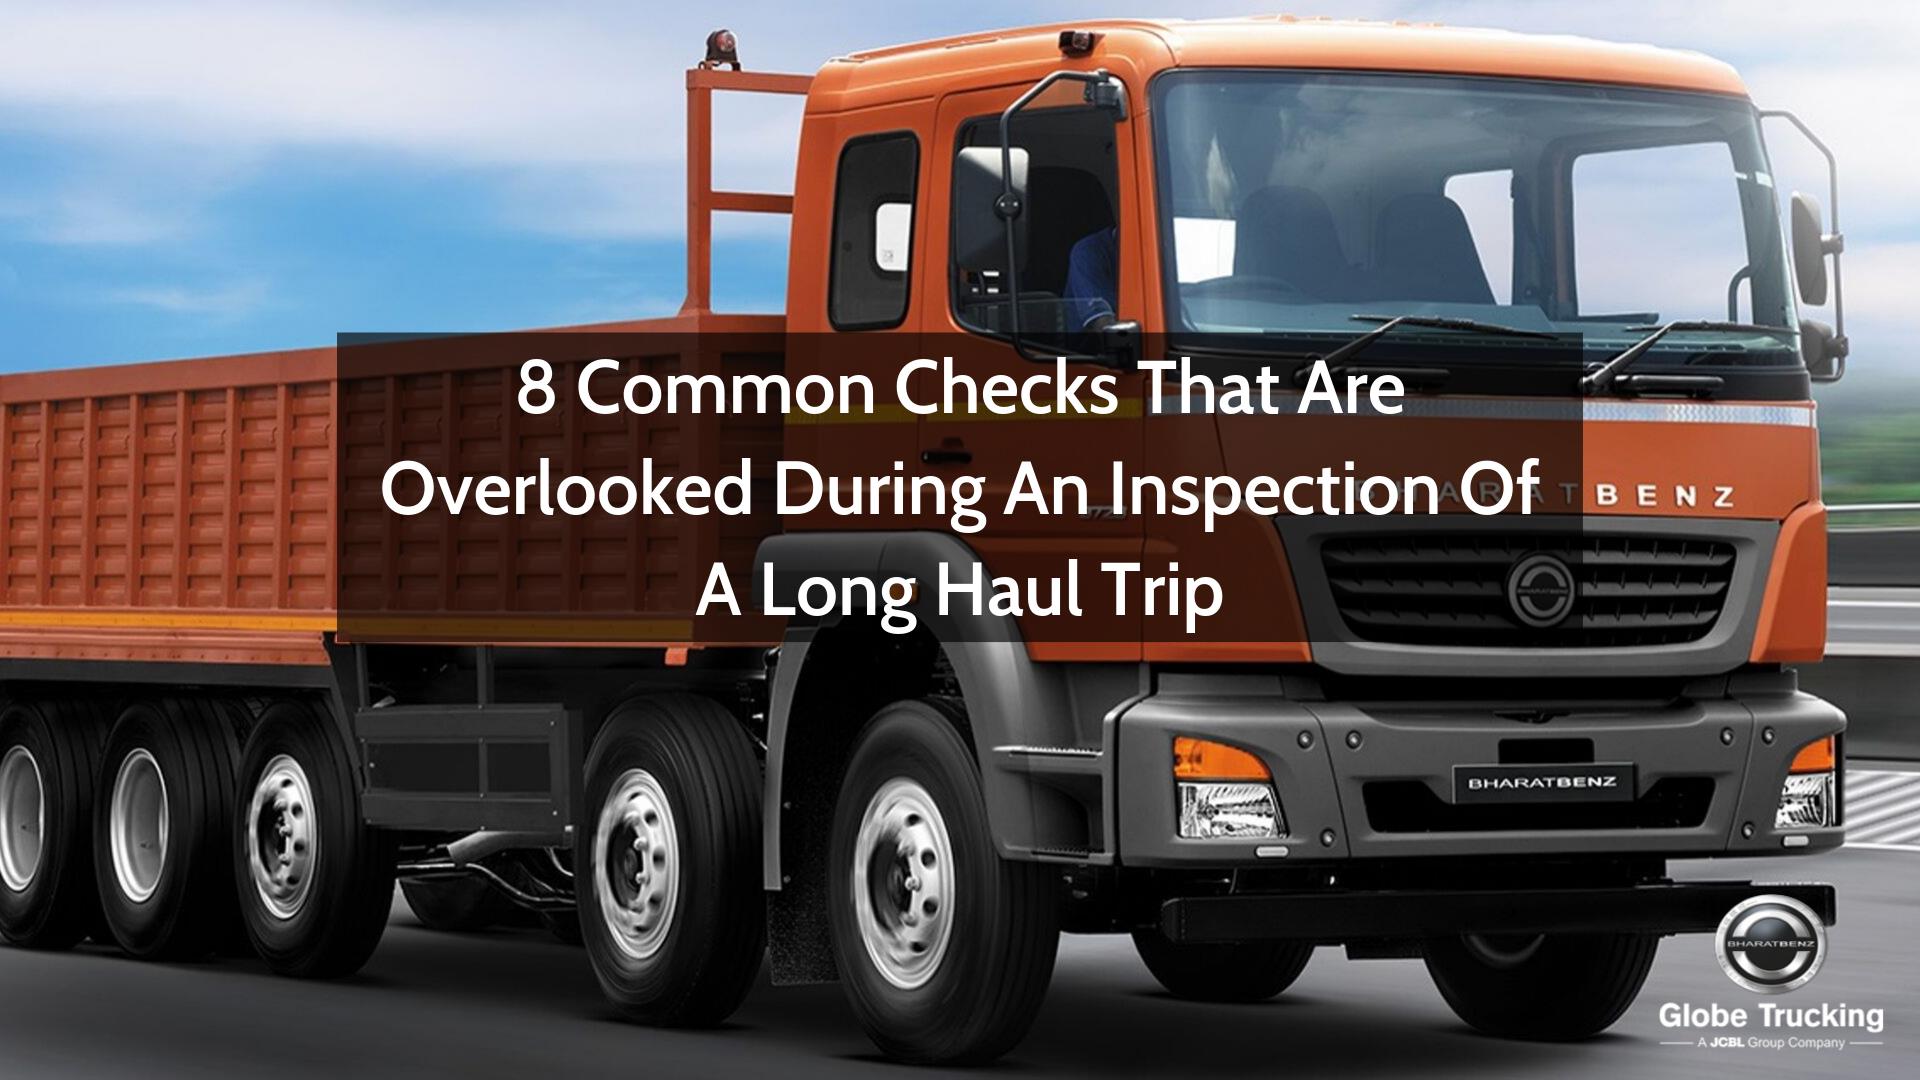 8 Common Checks That Are Overlooked During An Inspection Of A Long Haul Trip